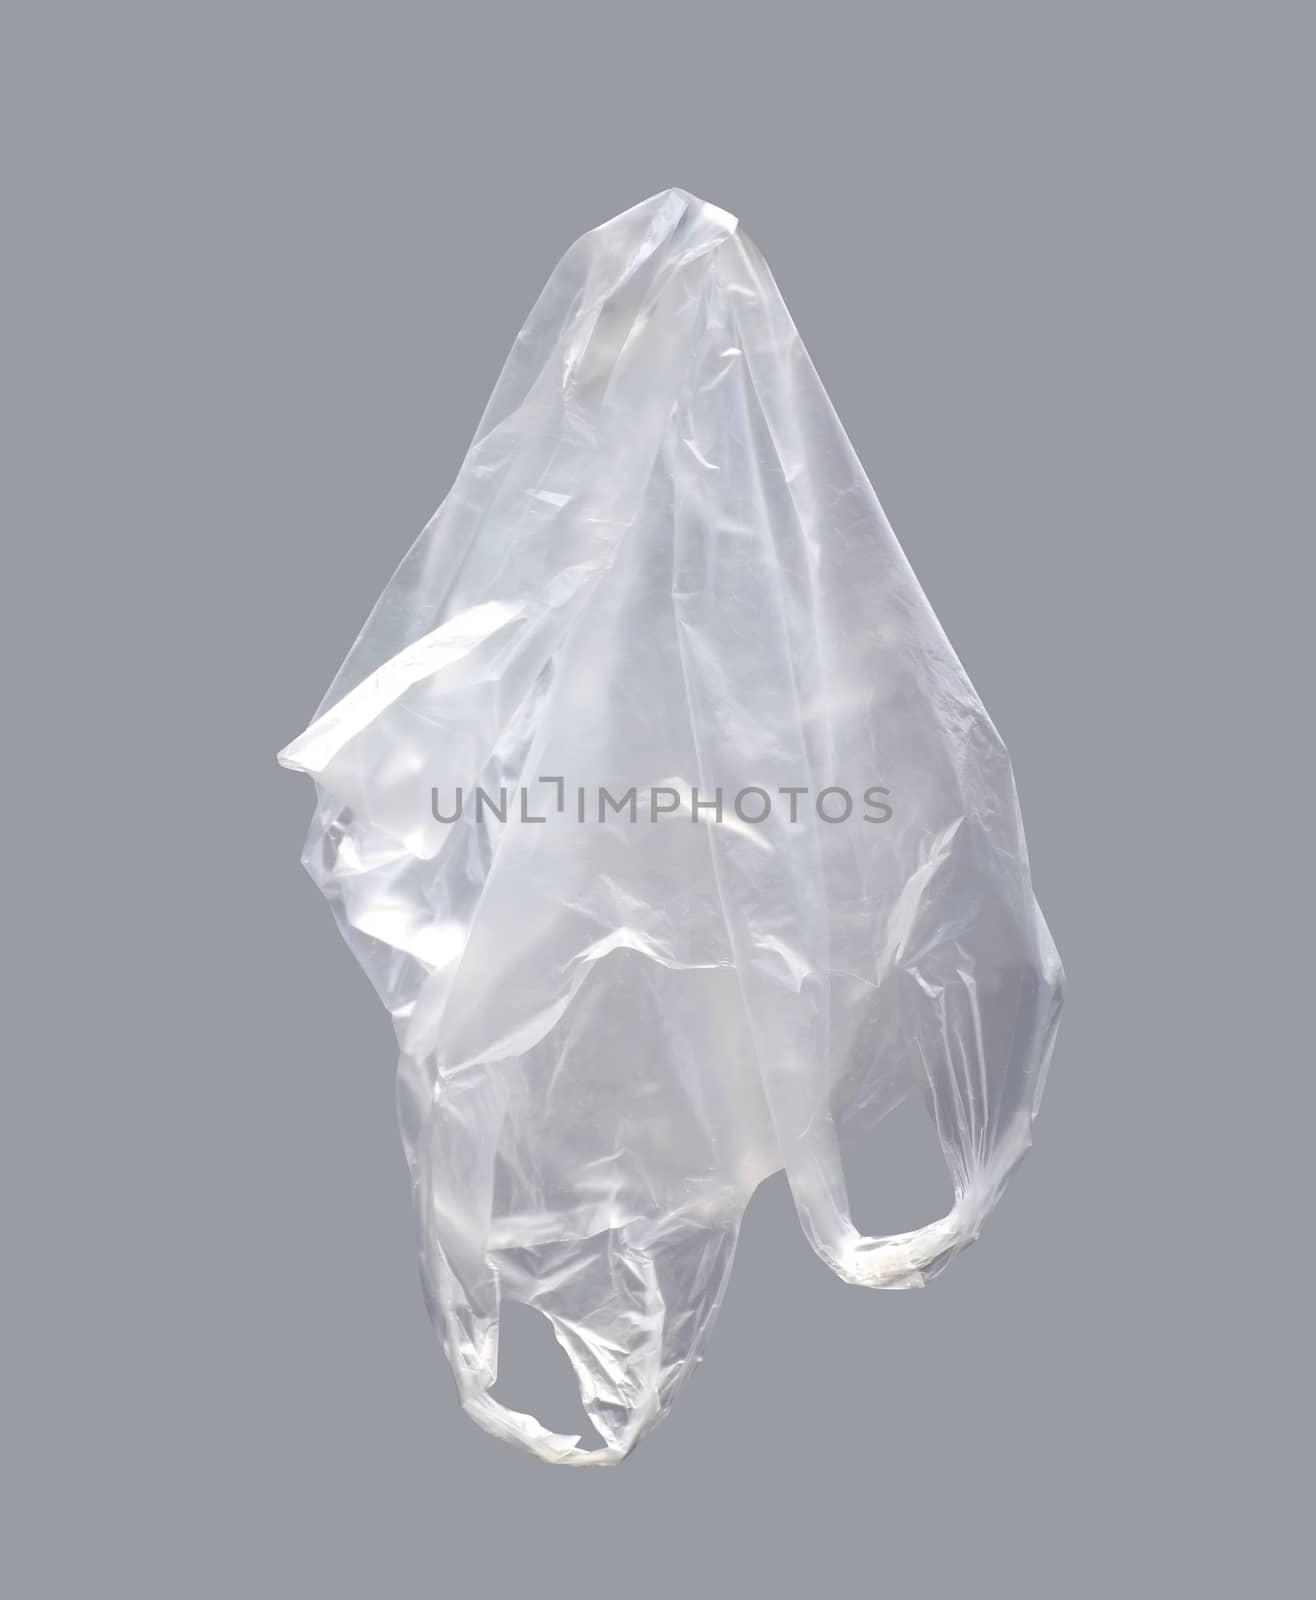 Plastic bag, Clear plastic bag on gray background, Plastic bag clear waste, Plastic bag clear garbage, Pollution from garbage waste bags by cgdeaw